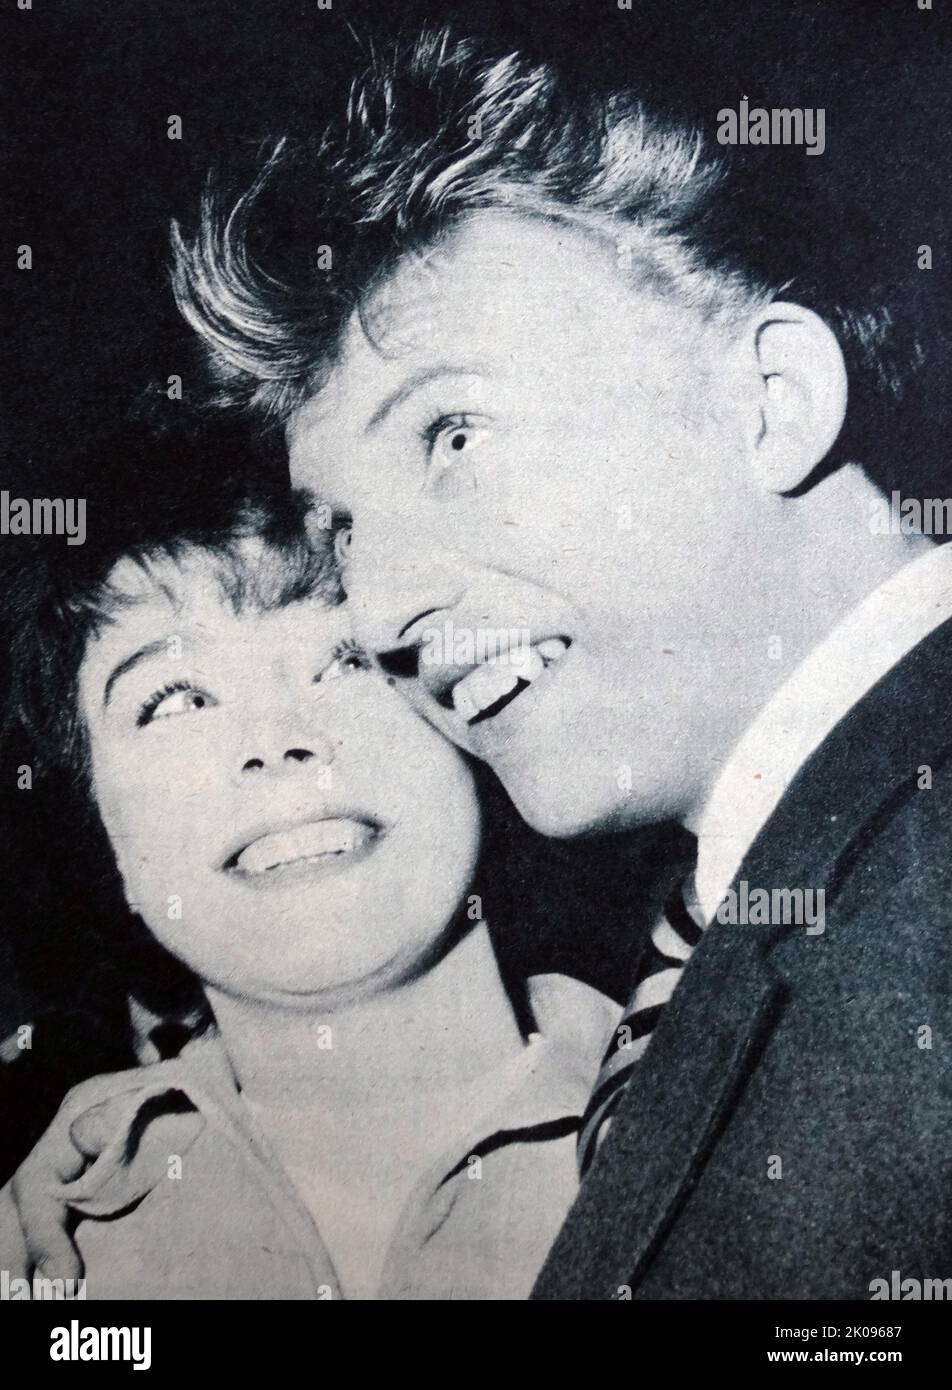 Tommy Steele and Jane Munro. Sir Thomas Hicks, OBE (born 17 December 1936), known professionally as Tommy Steele, is an English entertainer, regarded as Britain's first teen idol and rock and roll star. Janet Neilson Horsburgh (28 September 1934 - 6 December 1972), known as Janet Munro, was a British actress. Stock Photo